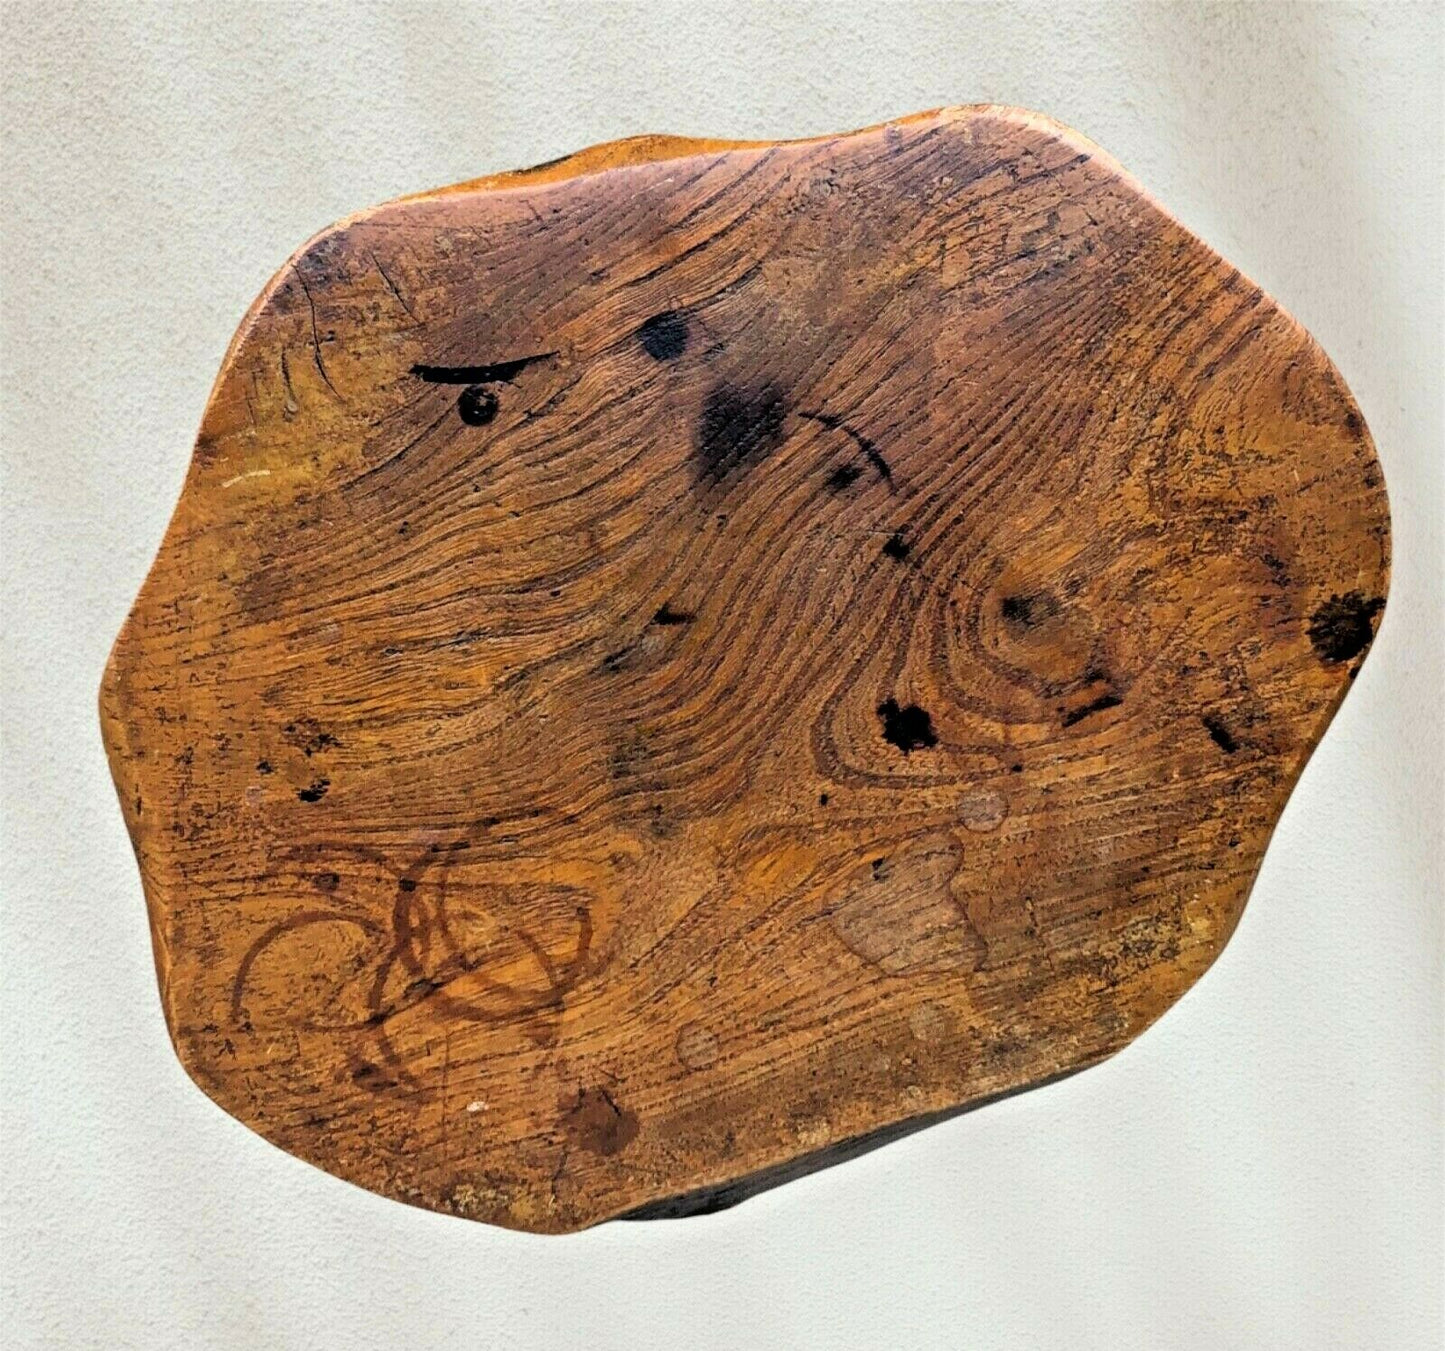 065.....Arts And Crafts Solid Elm Stool By Wanderwood (sold )